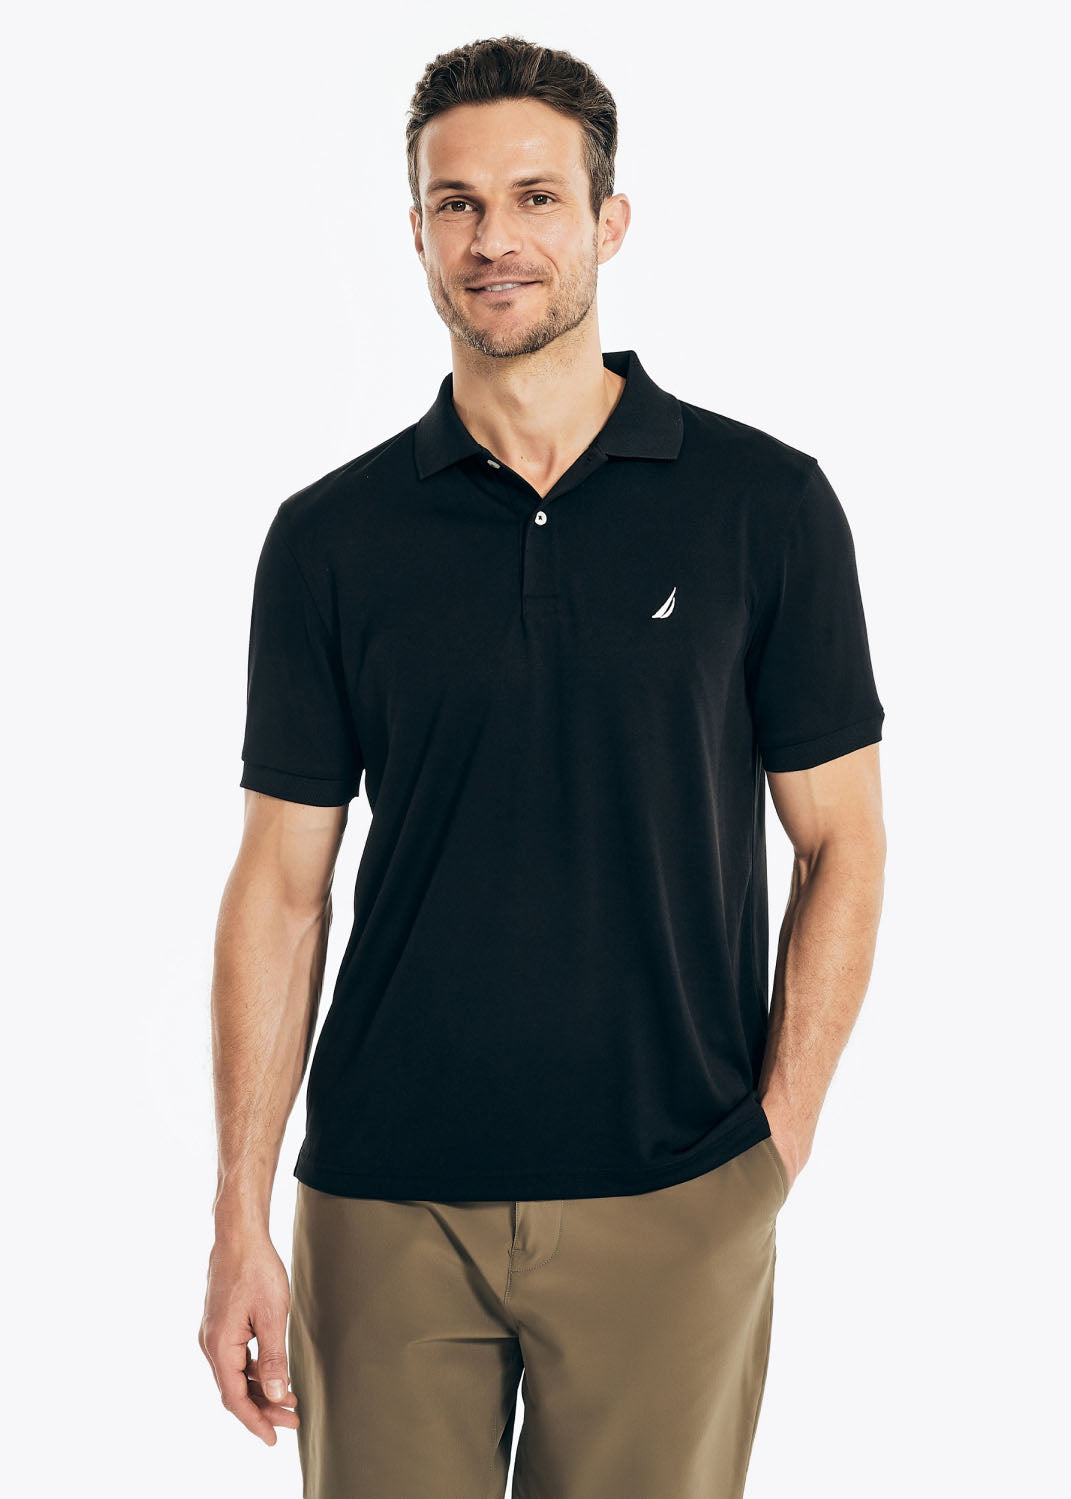 NAVTECH CLASSIC FIT PERFORMANCE POLO